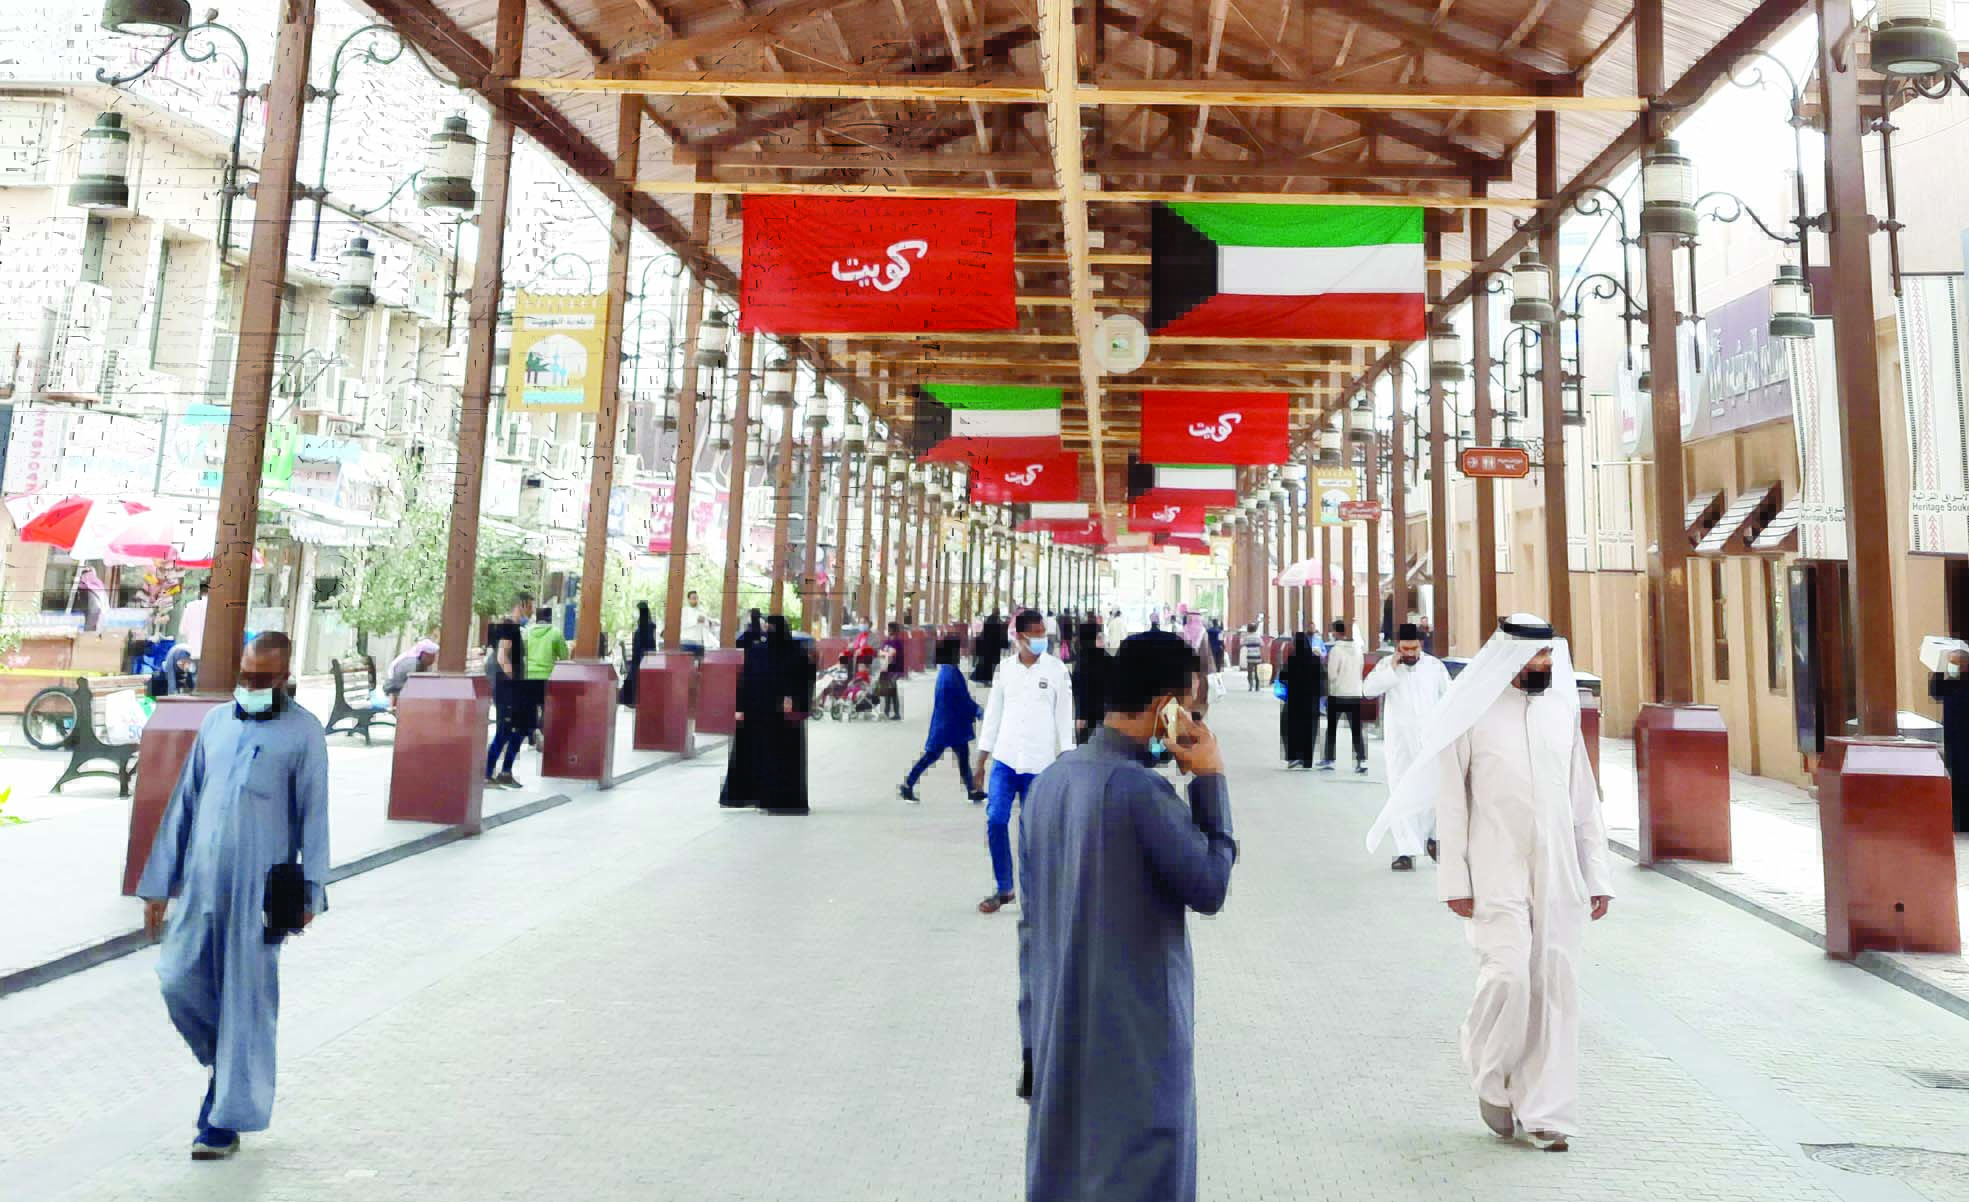 KUWAIT: People walk in Kuwait City's traditional Souq Mubarakiya, which has been decorated in celebration of the country's national holidays. - Photos by Fouad Al-Shaikhn